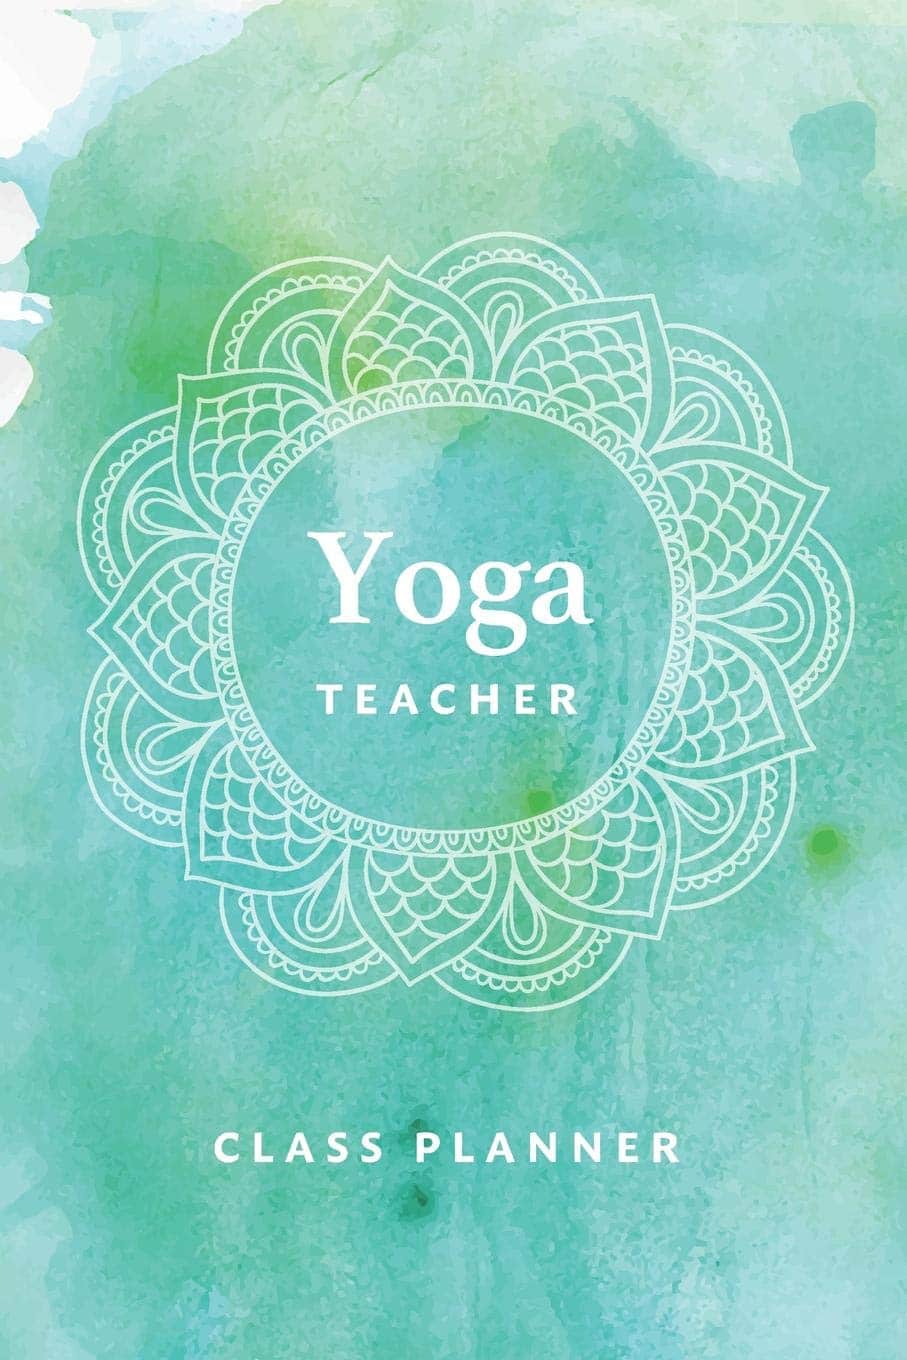 A yoga class planner, like the one in this image, makes a great gift idea for yoga teachers. 